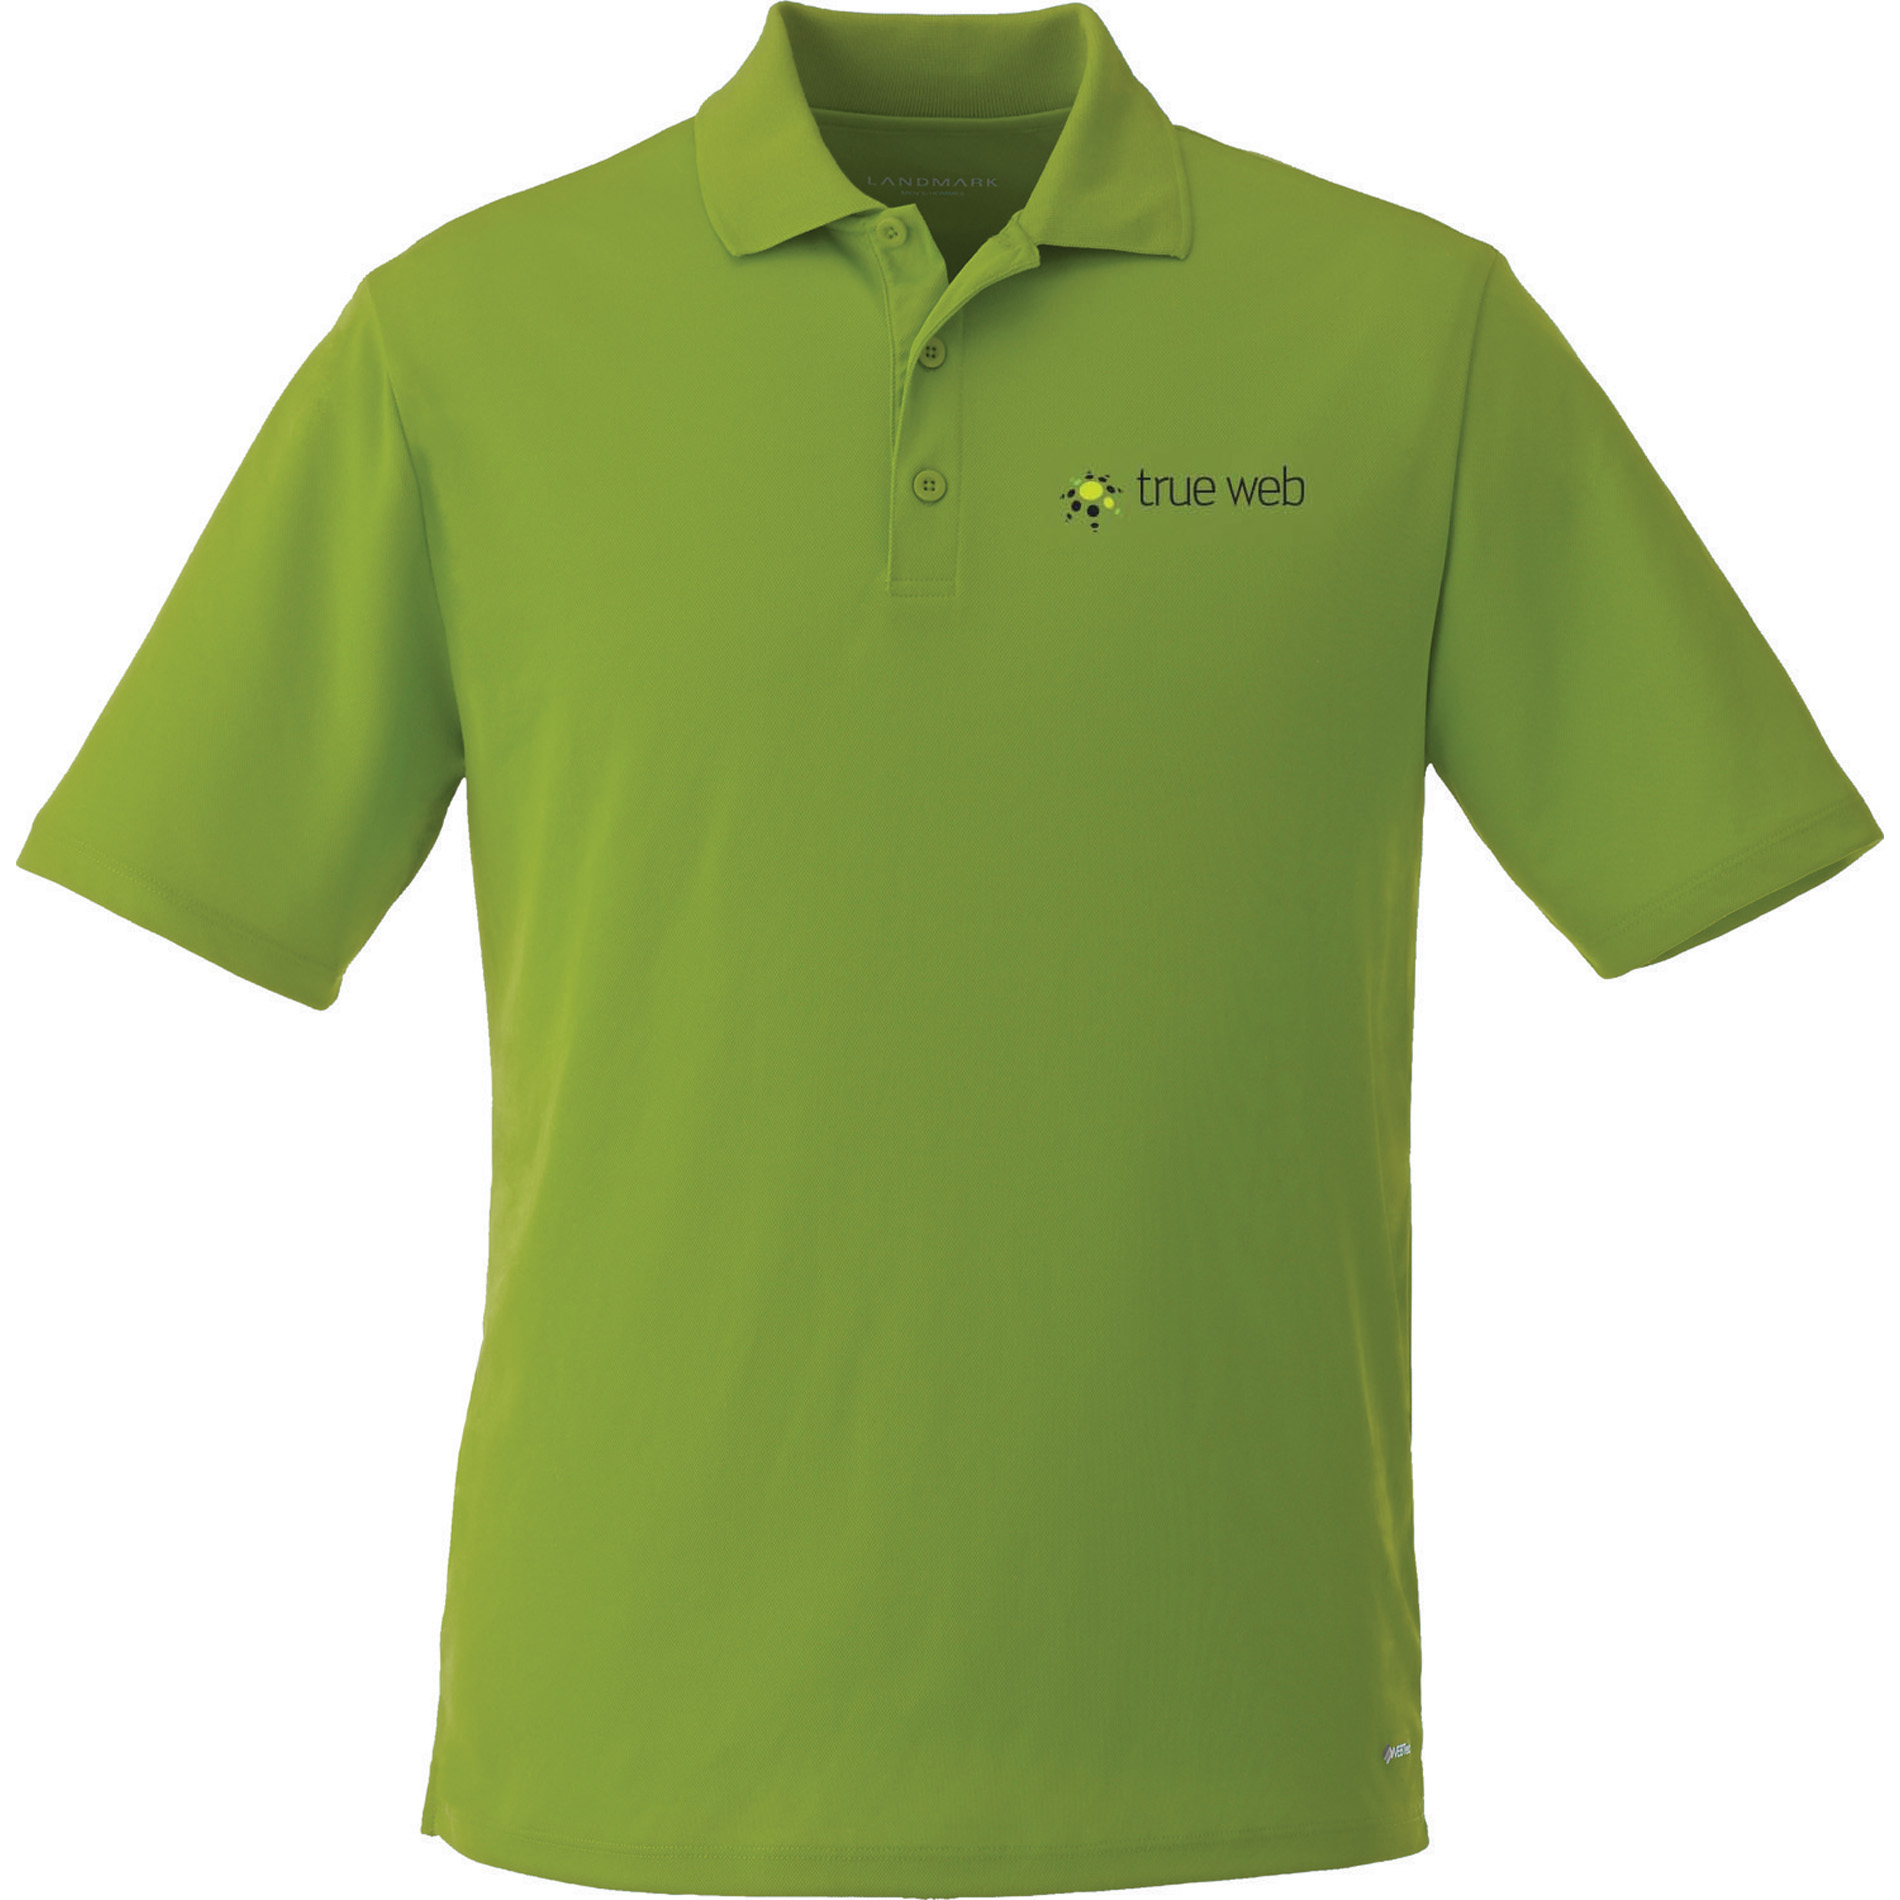 Promotional Products | Polos & Golf Shirts